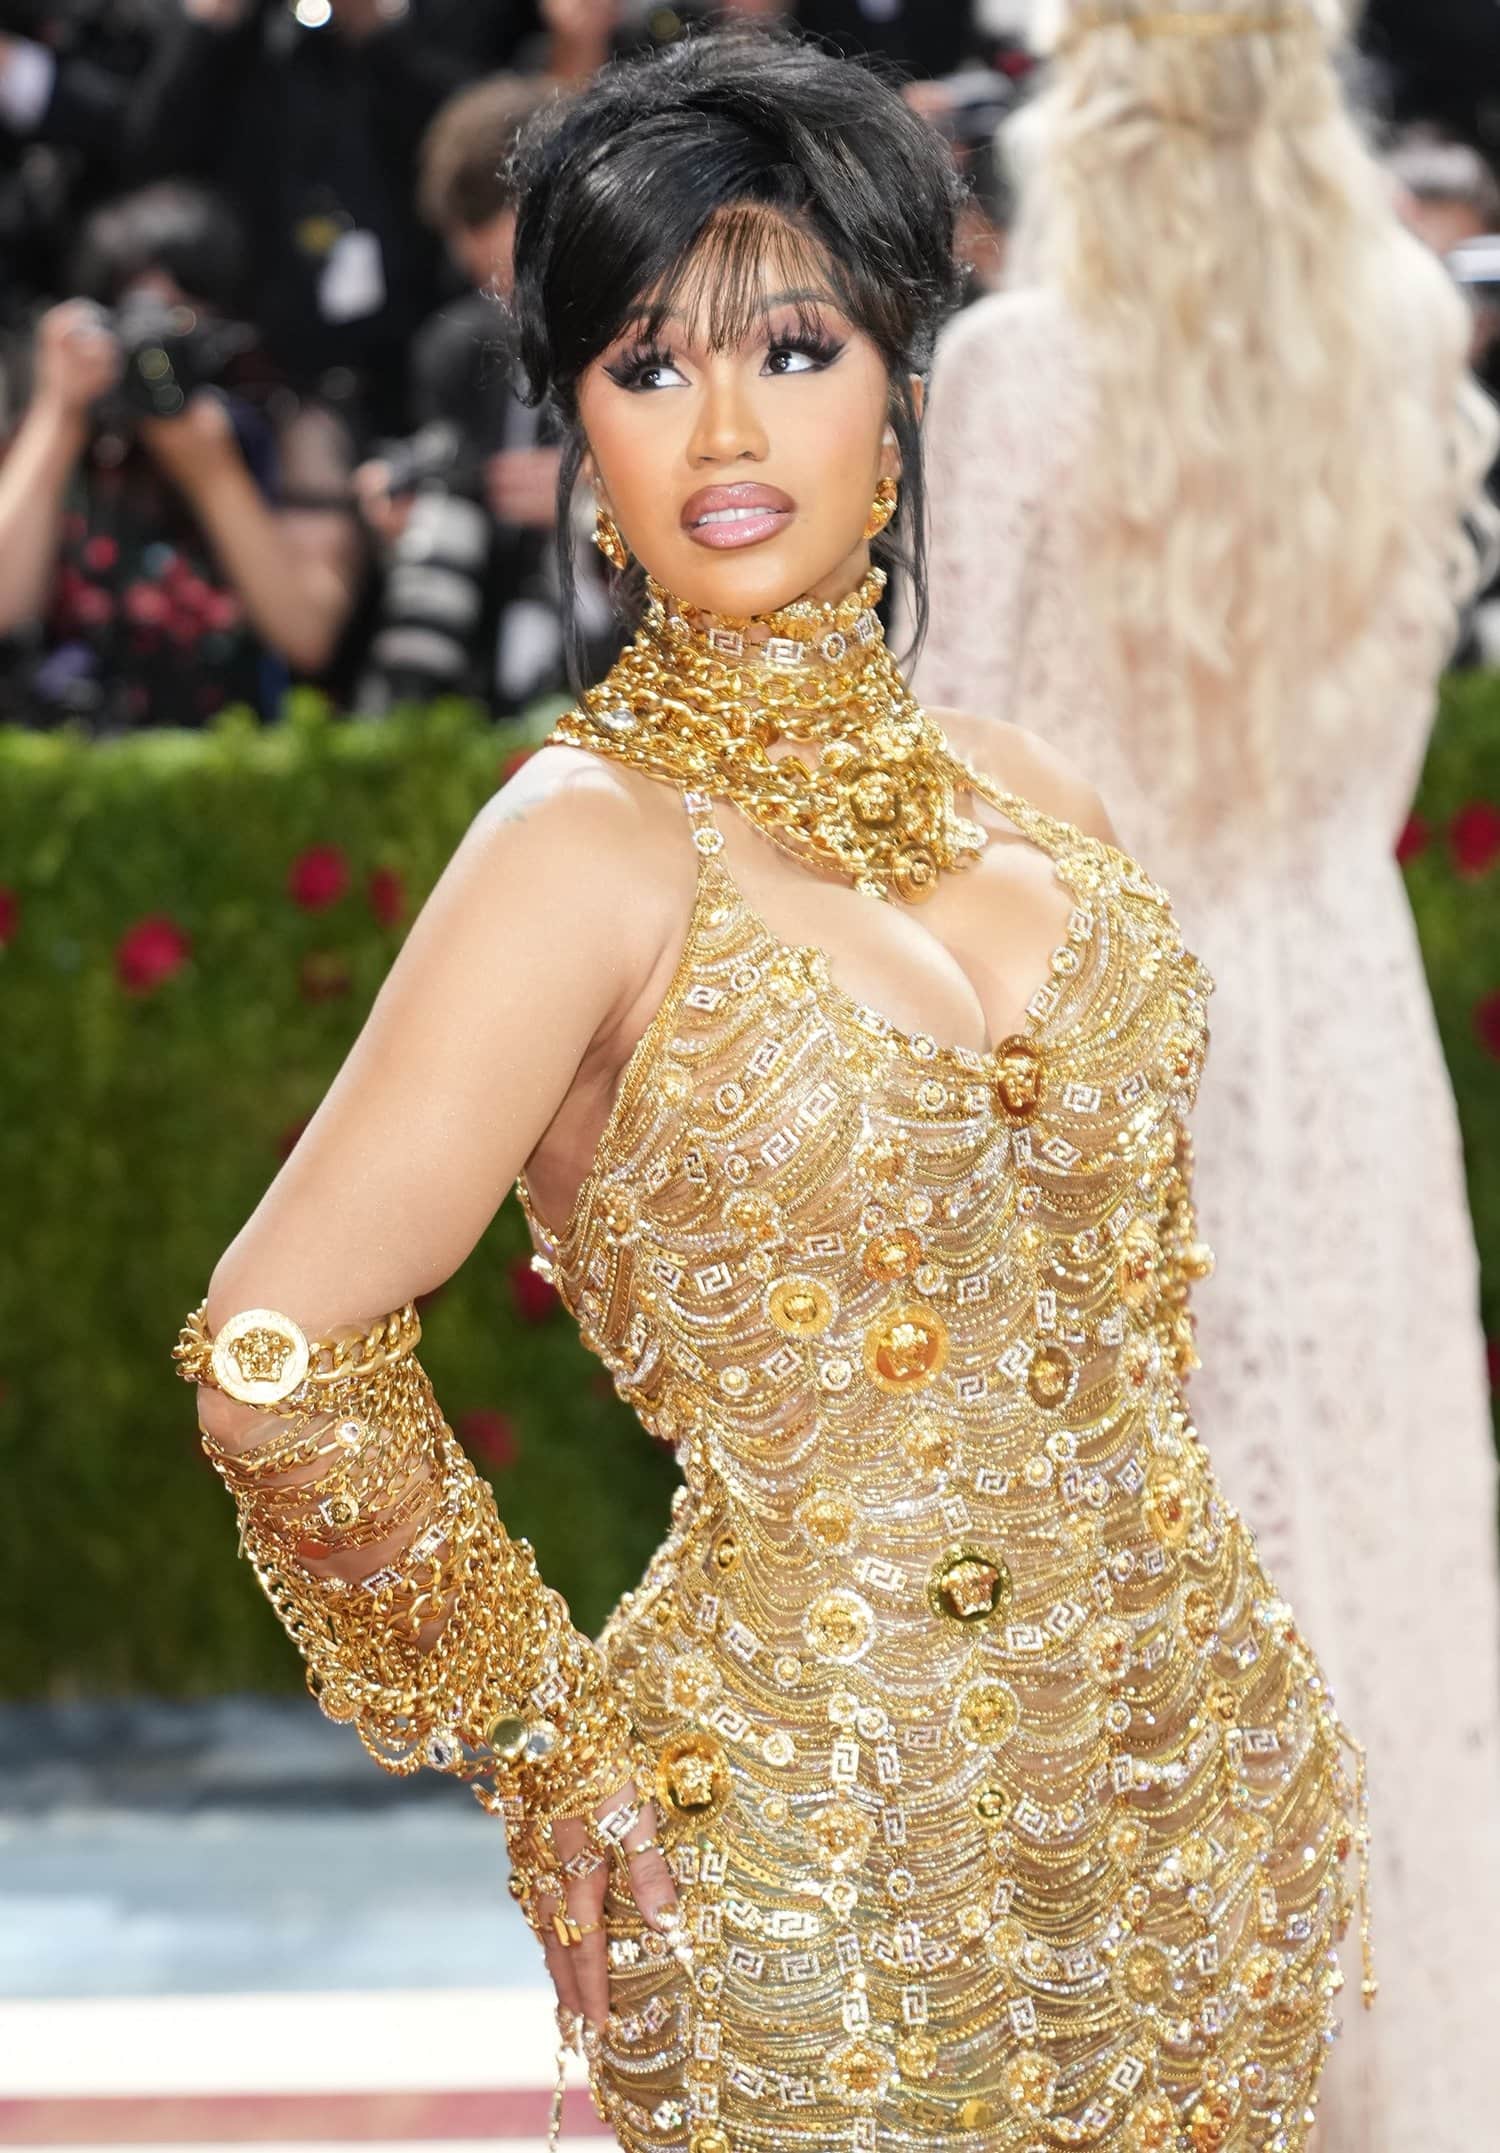 Cardi B stunned in a custom gold jewelry-covered gown by Versace featuring gold bracelets and necklaces